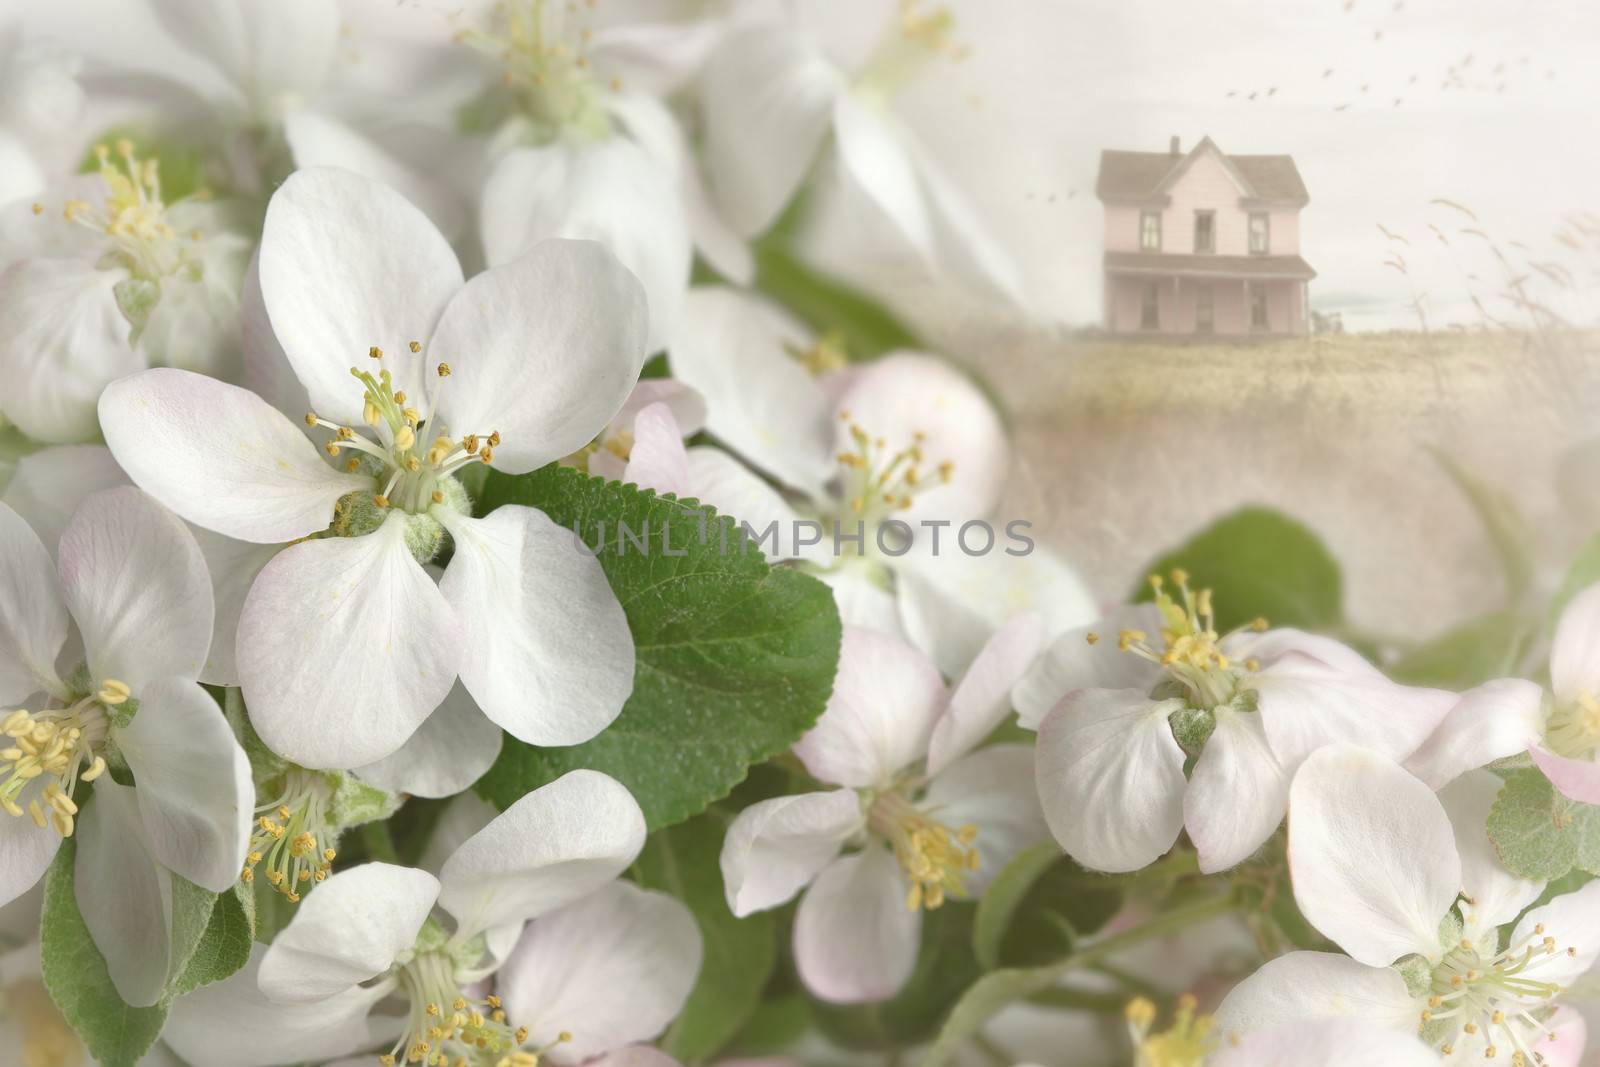 Apple blossoms with house in background by Sandralise